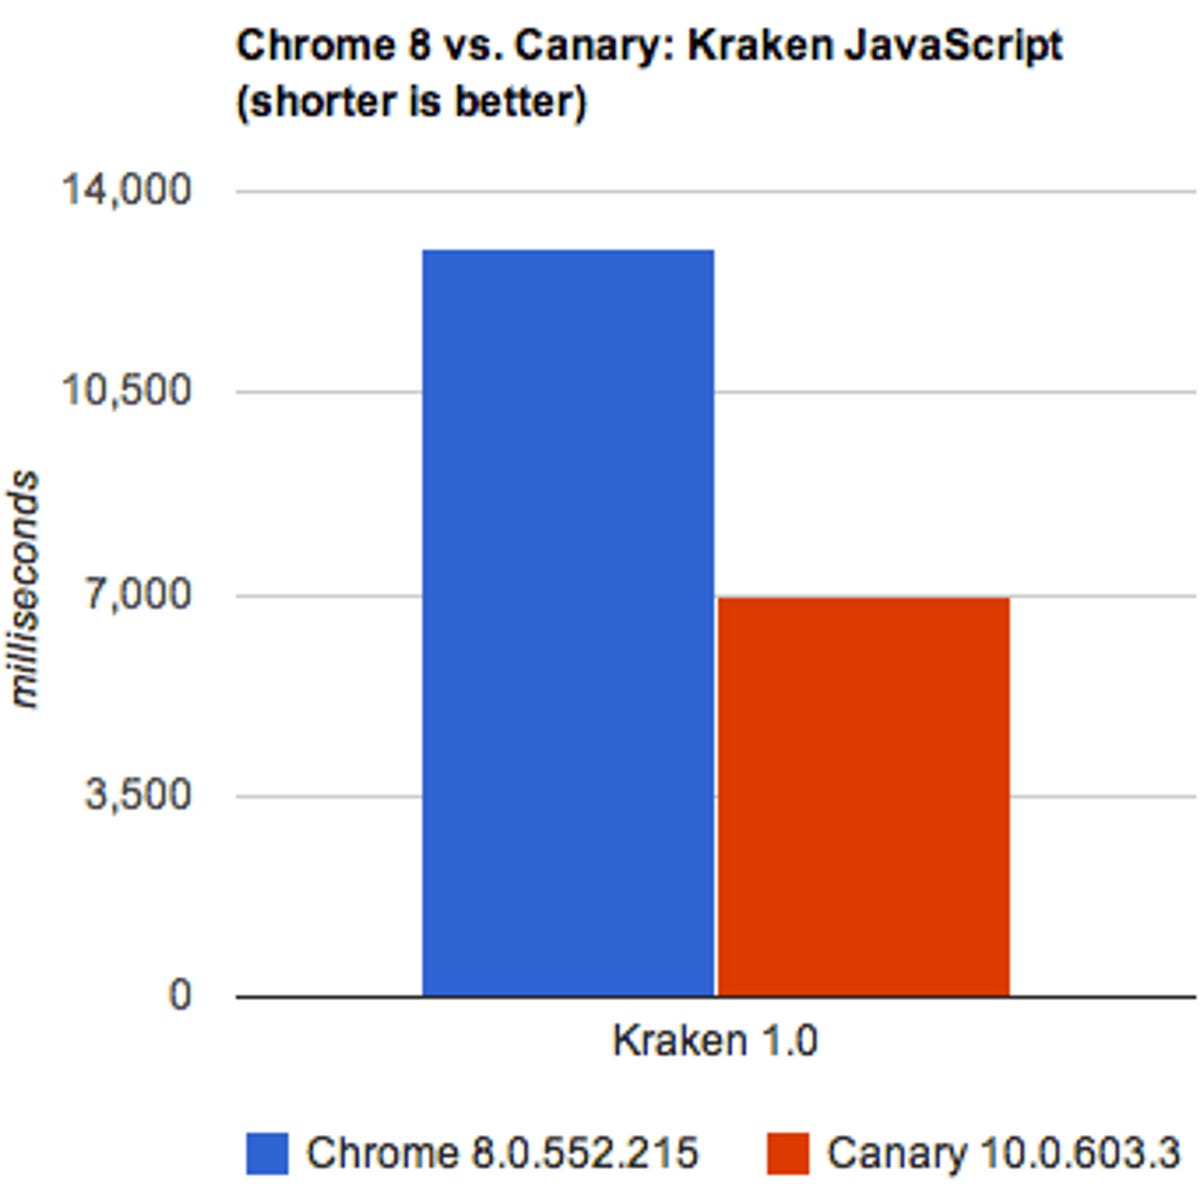 Chrome Canary uses the new Crankshaft version of Google's JavaScript engine. On Mozilla's Kraken test, where shorter bars are better, it wins handily over the current stable version of Chrome. This and other tests are on a Dell Studio XPS 16 with a 1.73GHz Intel Q820 Core i7 processor and 6GB of memory.